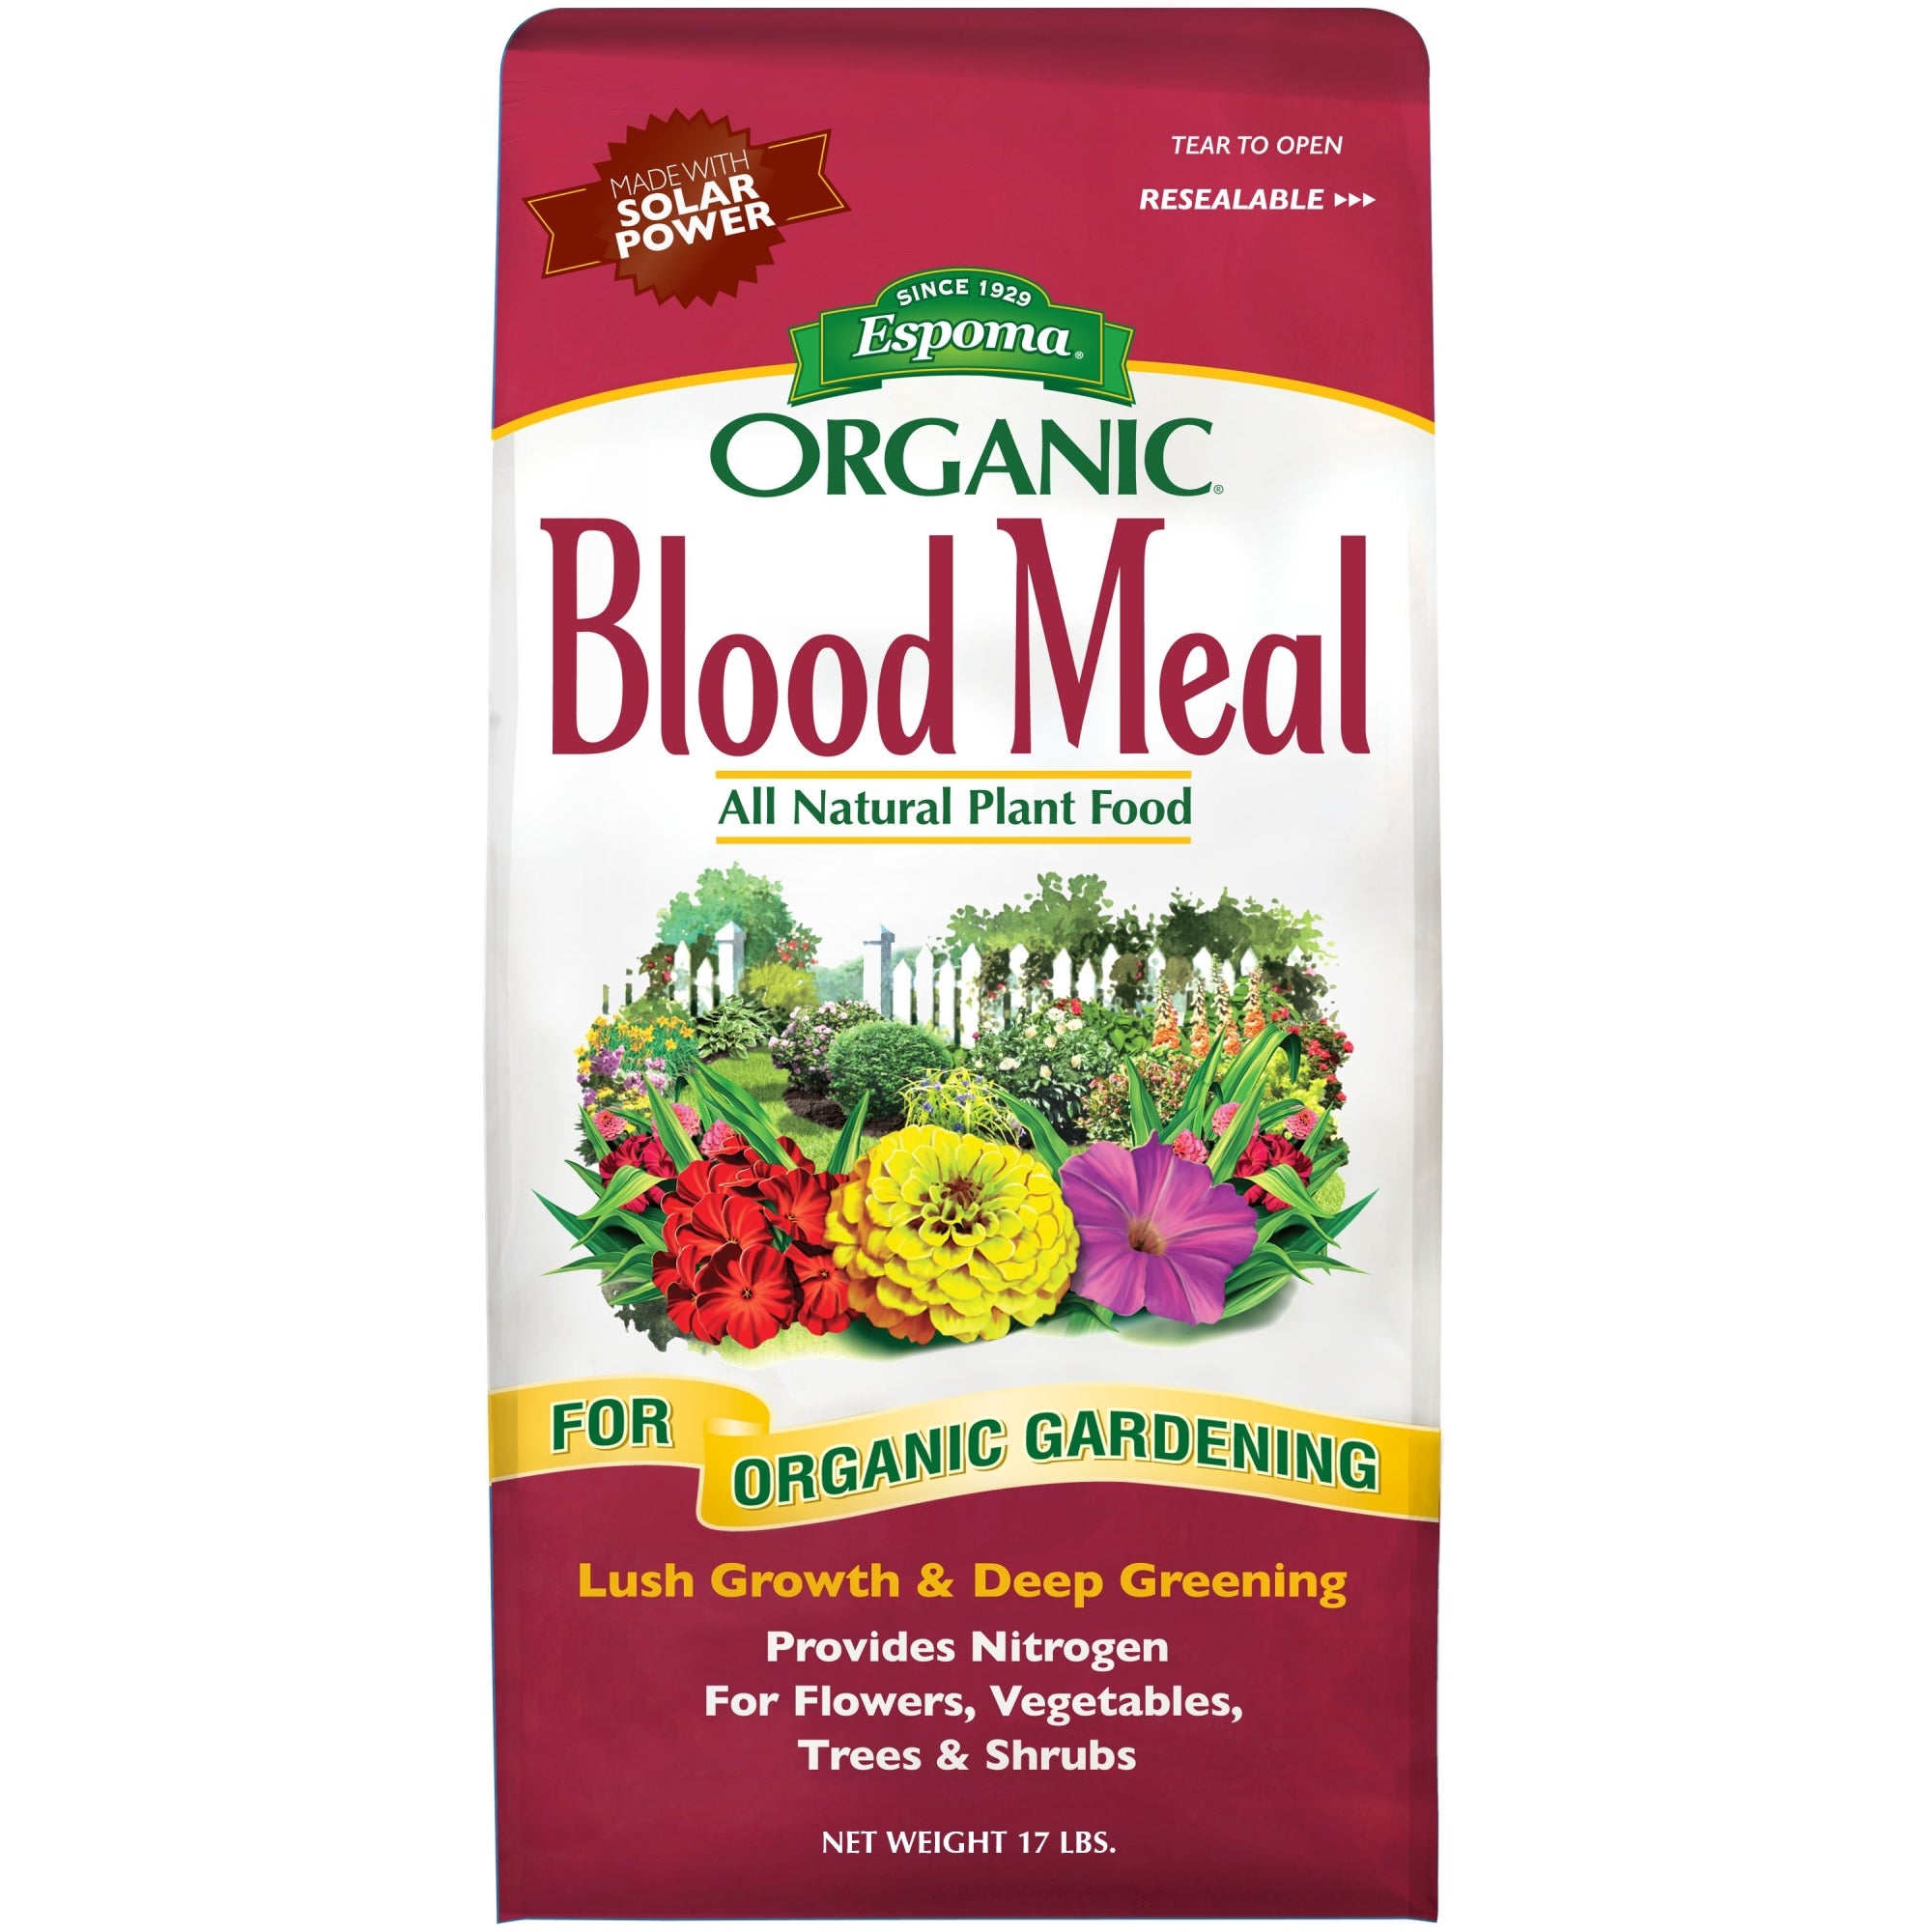 Espoma Organic Blood Meal 12-0-0 All-Natural Plant Food, Provides Nitrogen for Organic Gardening, for Flowers, Vegetables, Trees & Shrubs